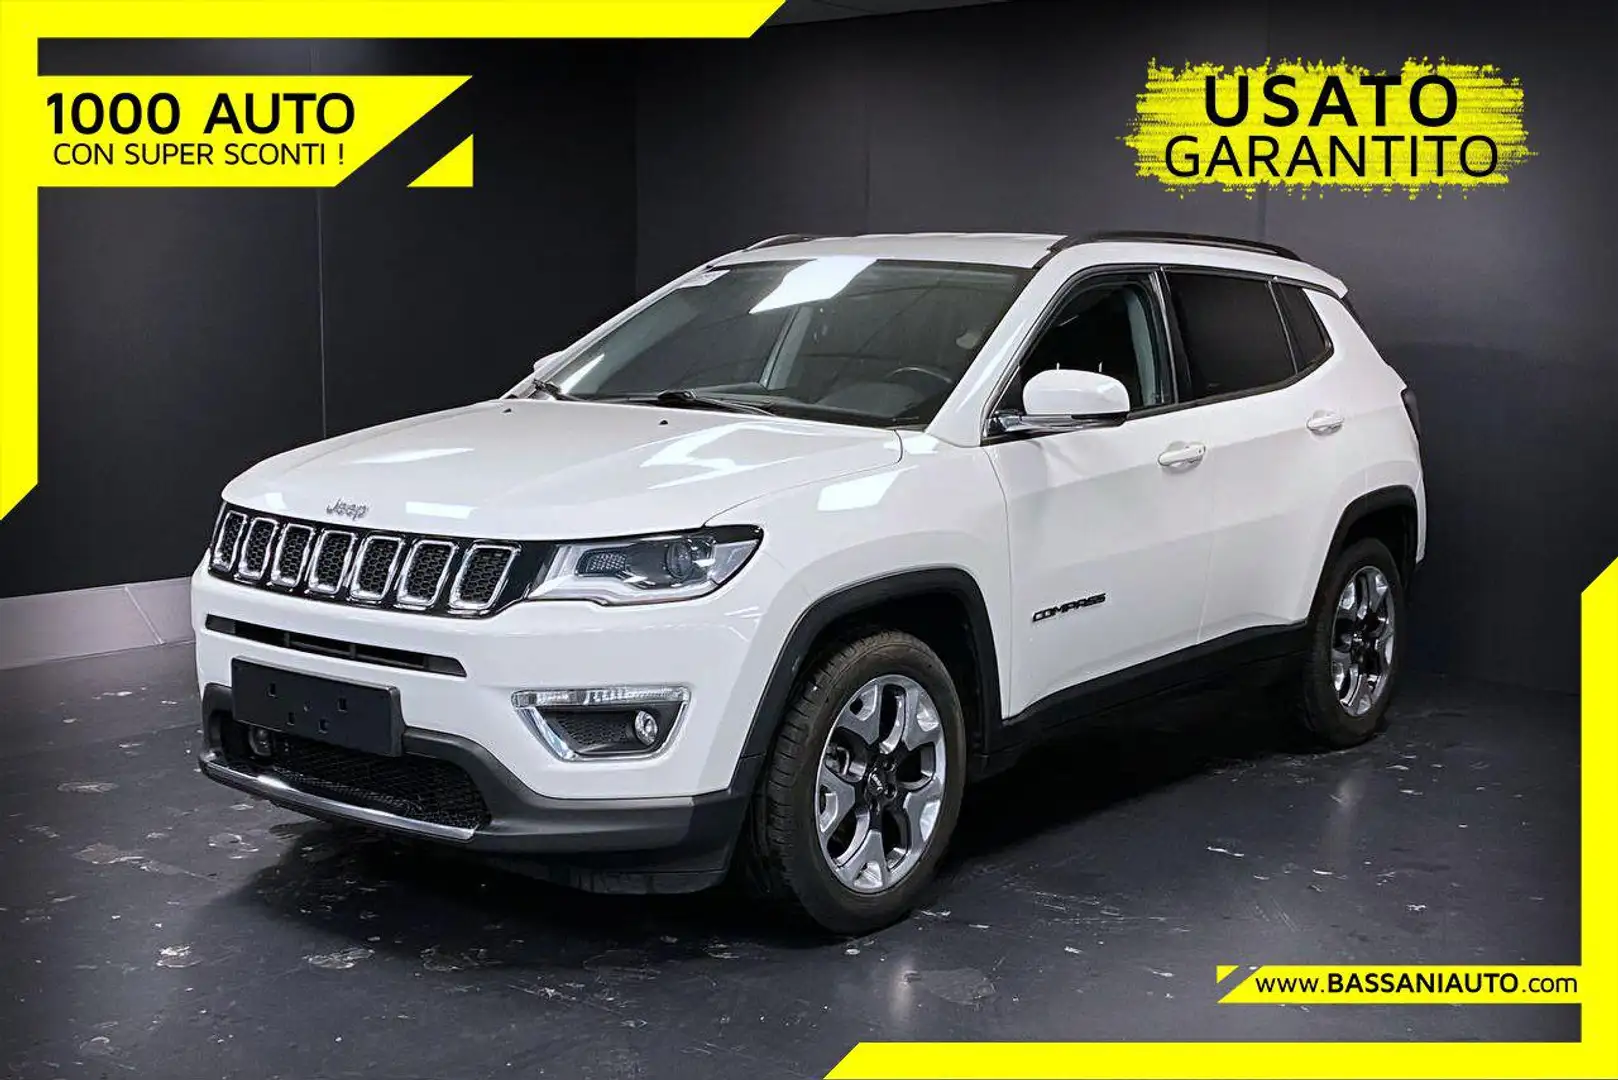 Jeep Compass 1.6 Multijet II 2WD Limited White - 1